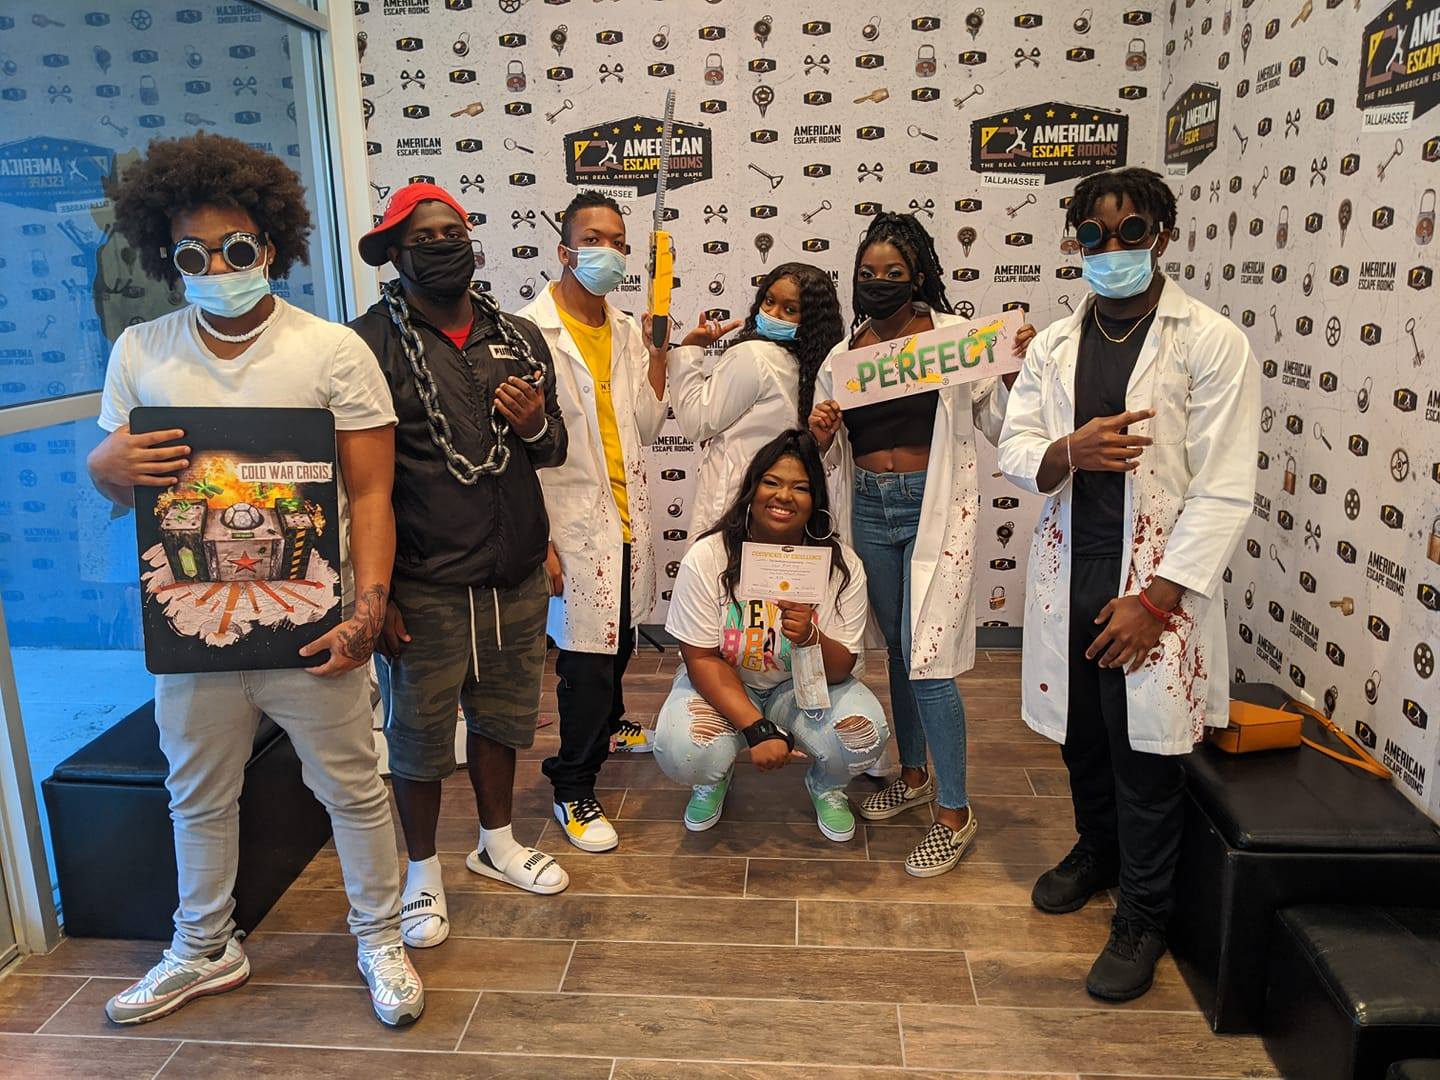 Never Broke Again played the Mad Professor's Asylum - Tallahassee and finished the game with 50 minutes 31seconds left. Congratulations! Well done!